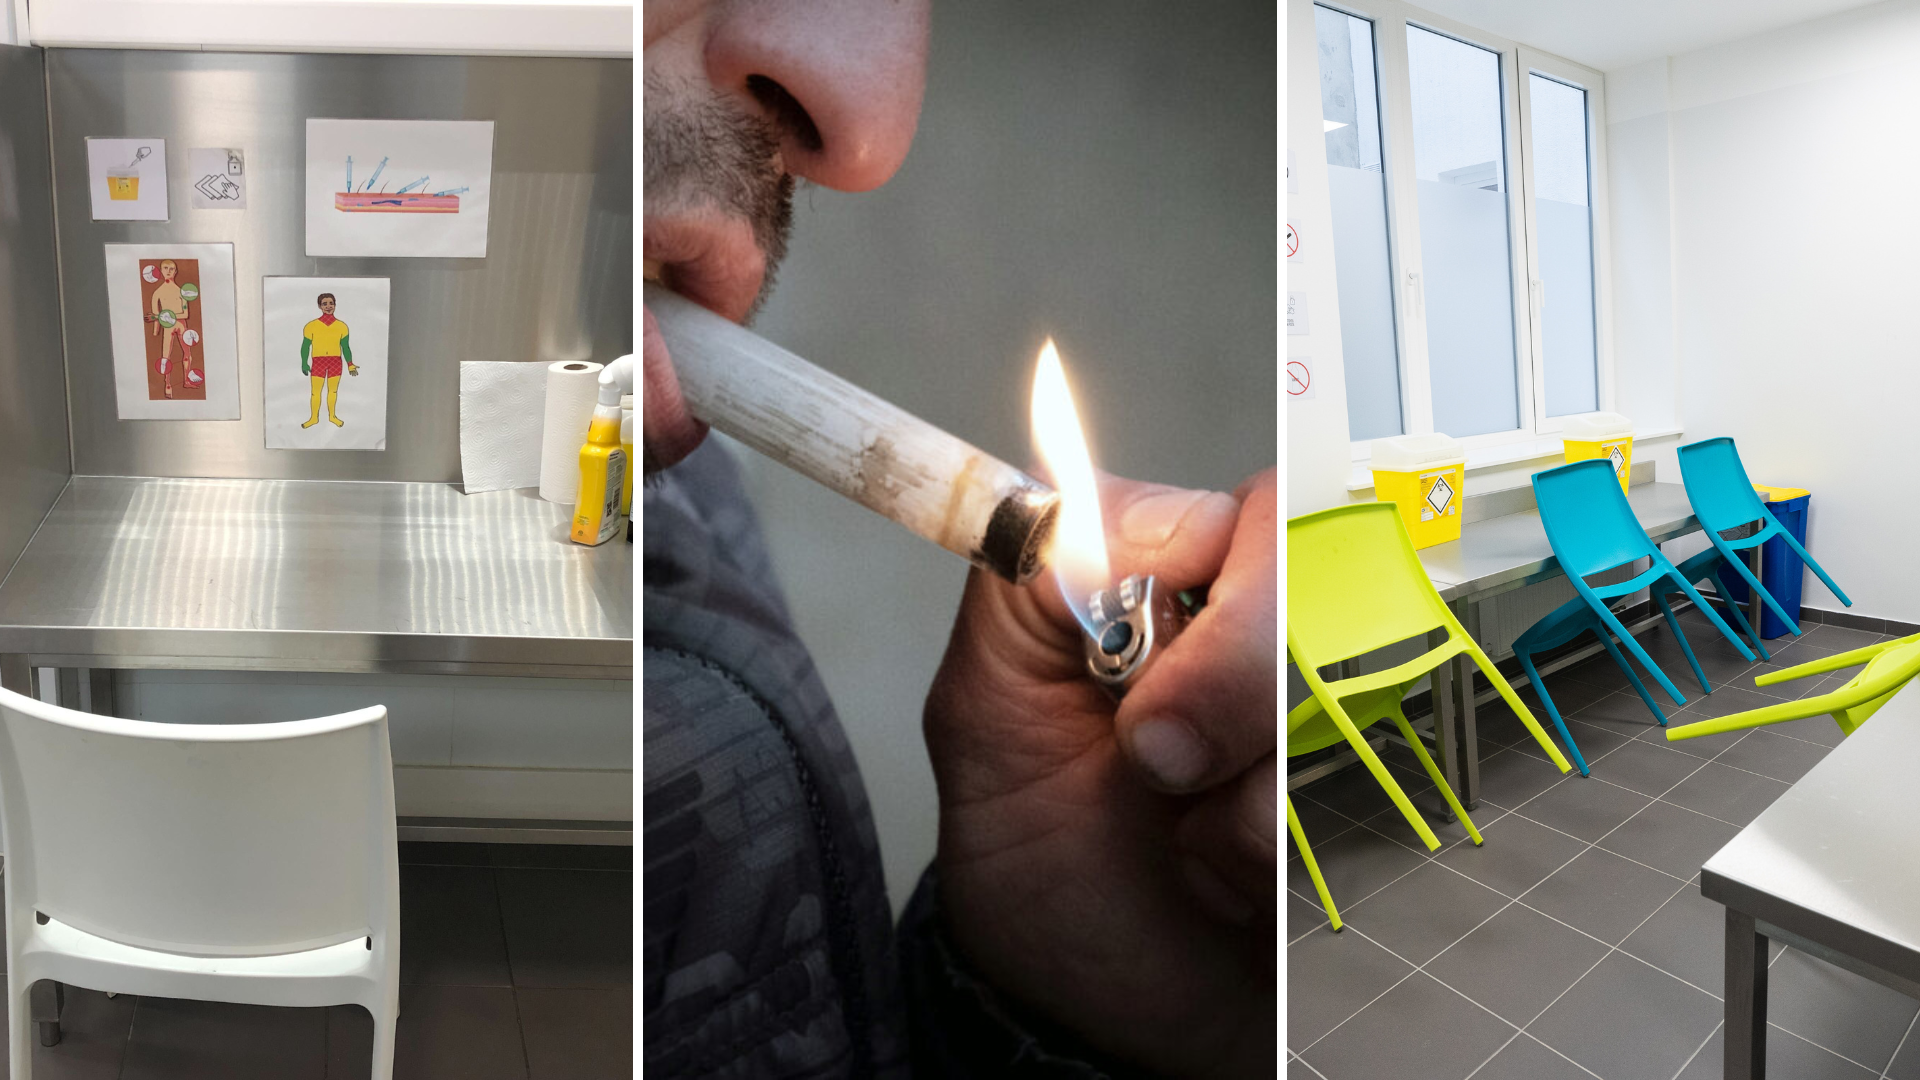 'They consume less here': Inside the Brussels centre supervising drug addiction